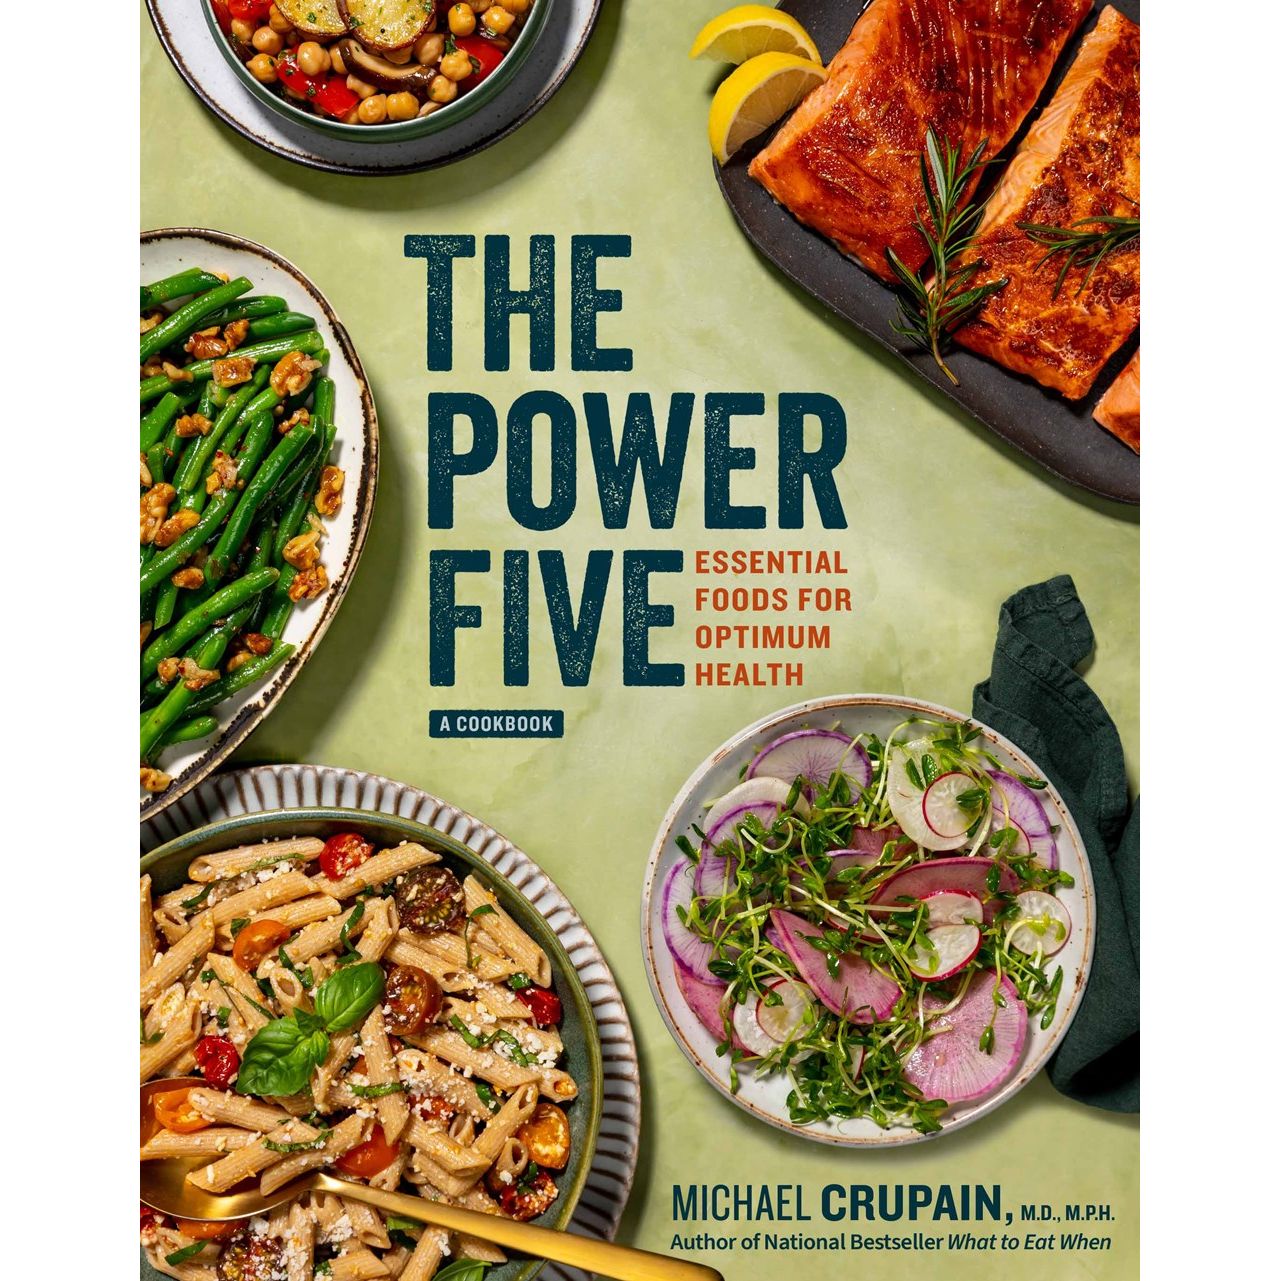 SIGNED: The Power Five (Michael Crupain)